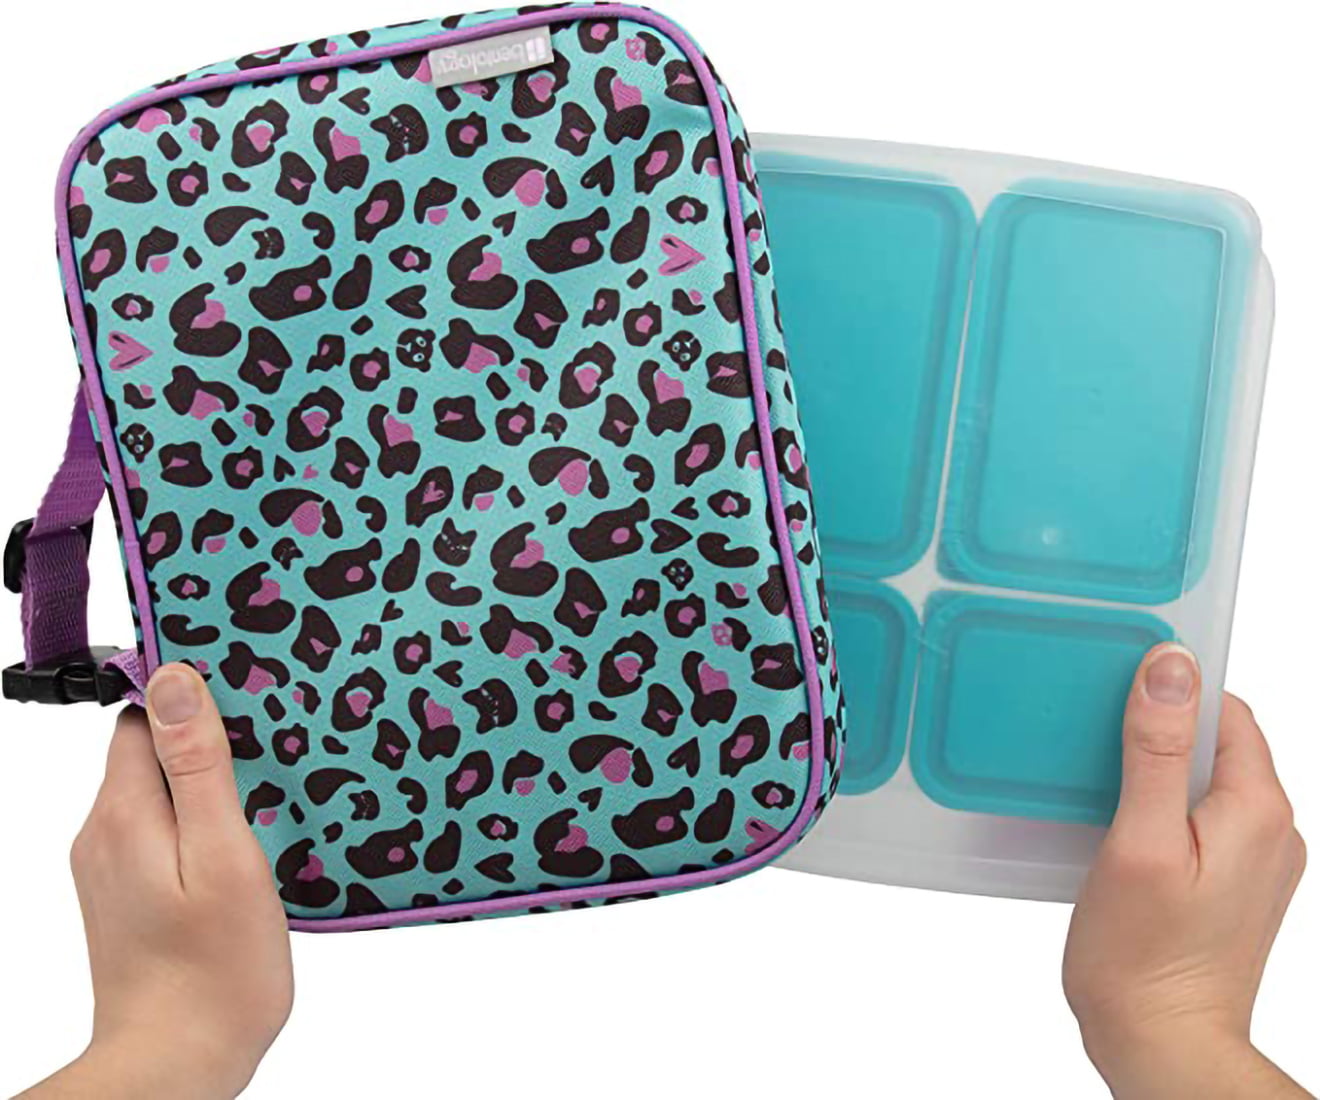 Bentology Lunch Box for Boys - Kids Insulated, Durable Lunchbox Tote Bag  Fits Bento Boxes, Nesting Containers w/ Lids & Bottles, Back to School Lunch  Sleeve Kee